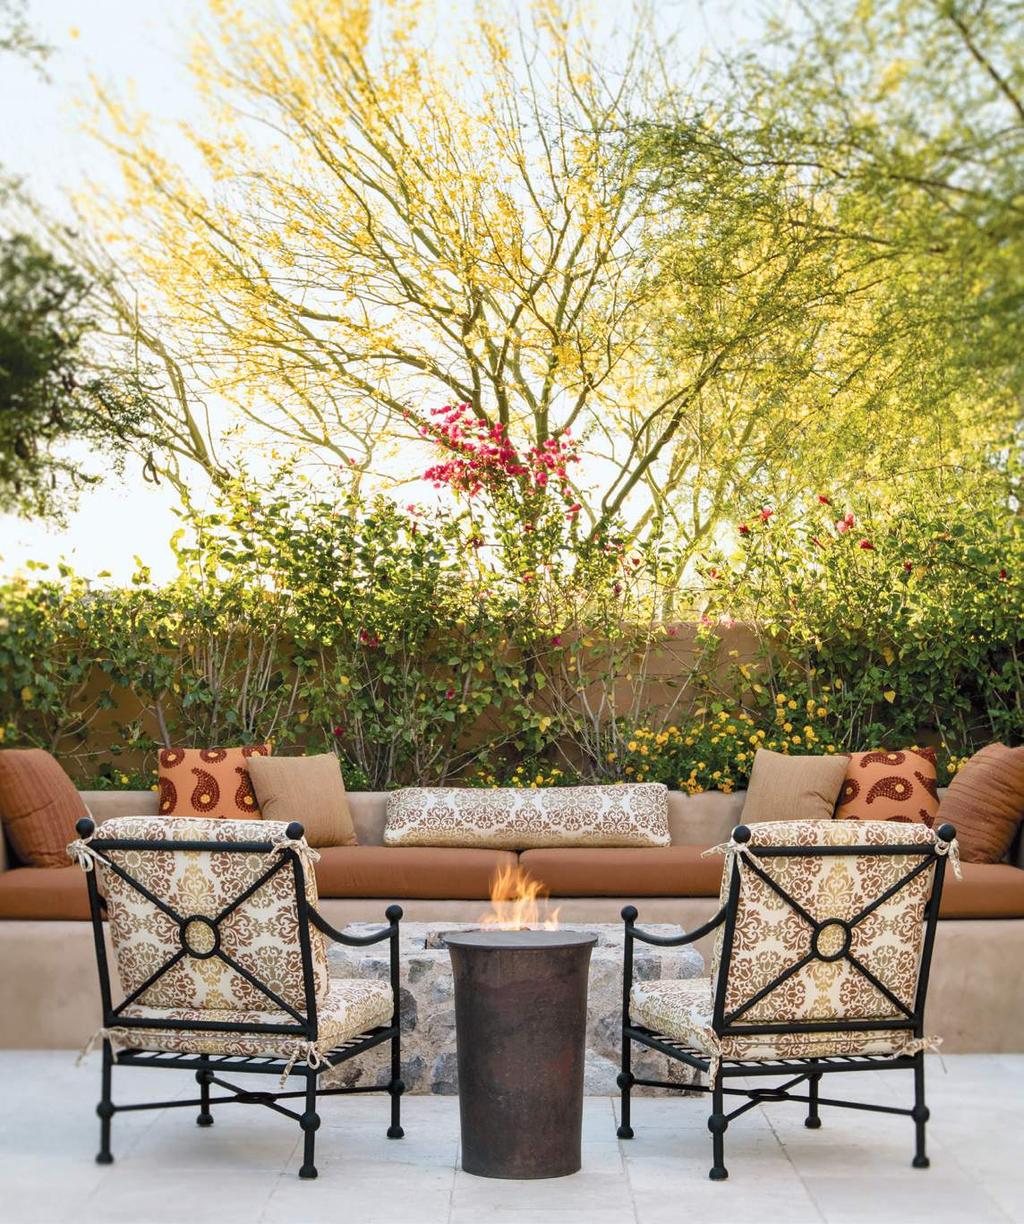 In the rear of the house, chairs by Murray s Iron Works flank a table from Inside/Out to fashion a cozy seating area in front of the fire pit.